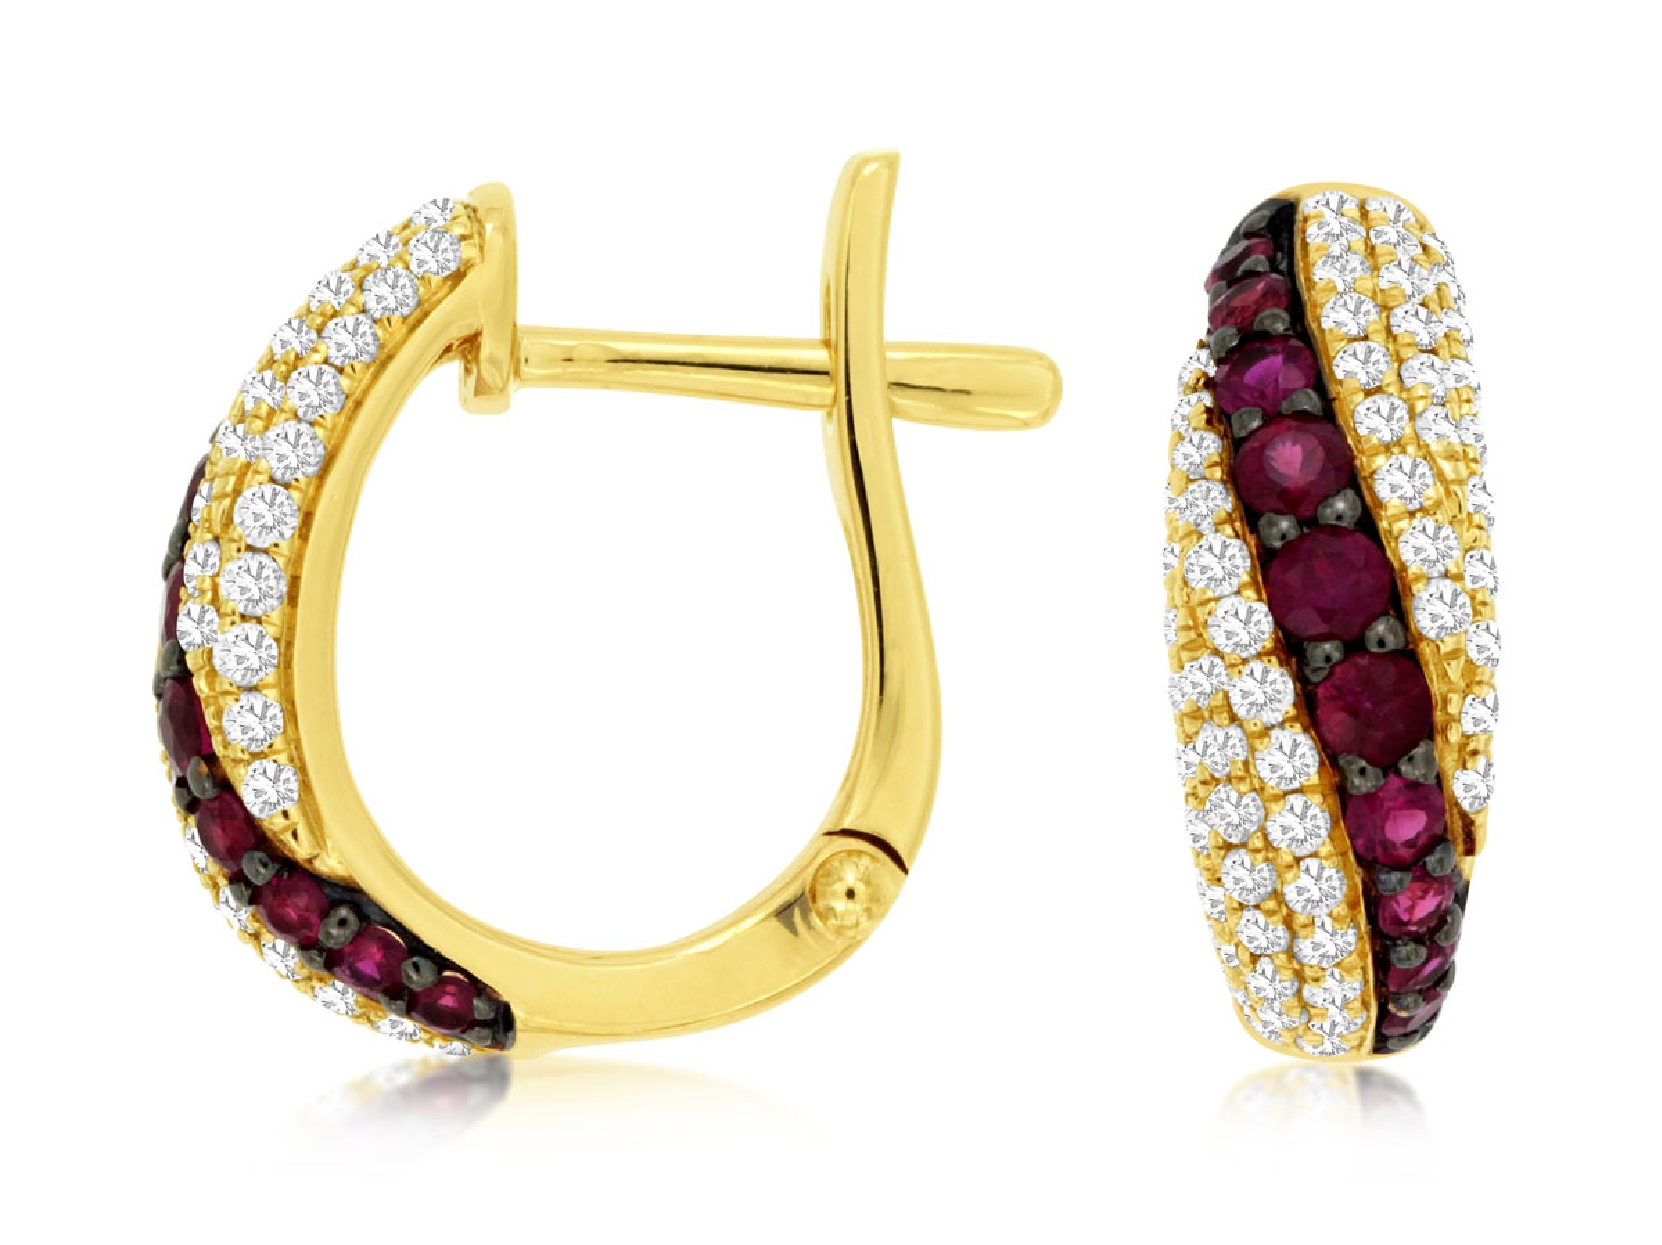 14K Yellow Gold Hinged Hoop Earrings with Crossover Ruby and Diamond Pave Design

.45cttw Rubies 
0.48cttw Diamonds